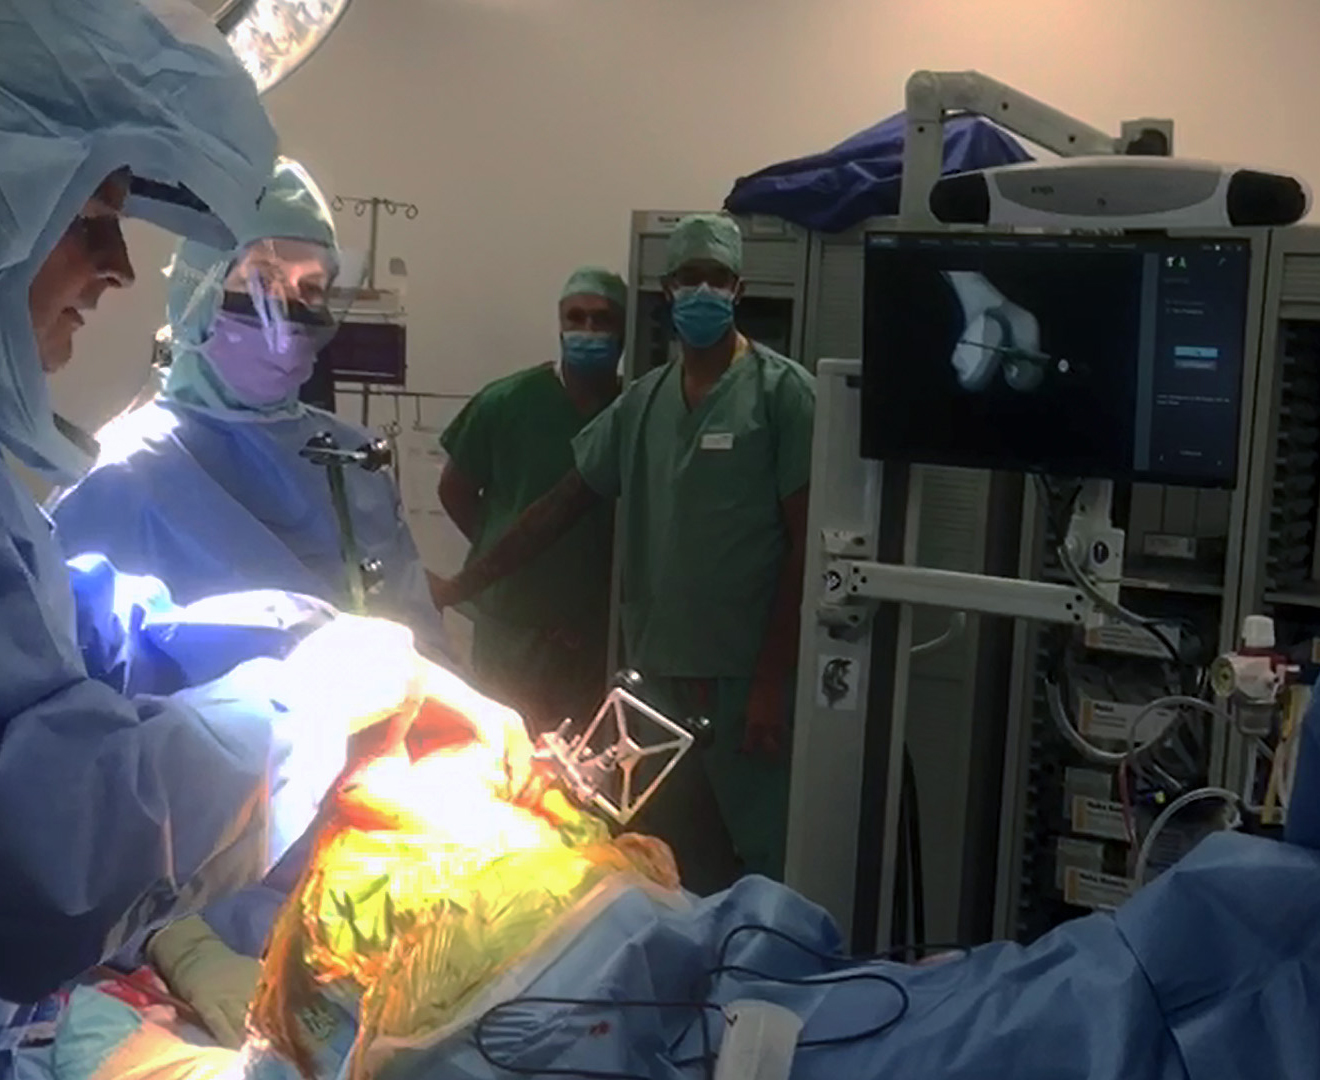 The 1,000th hip/knee replacement taking place